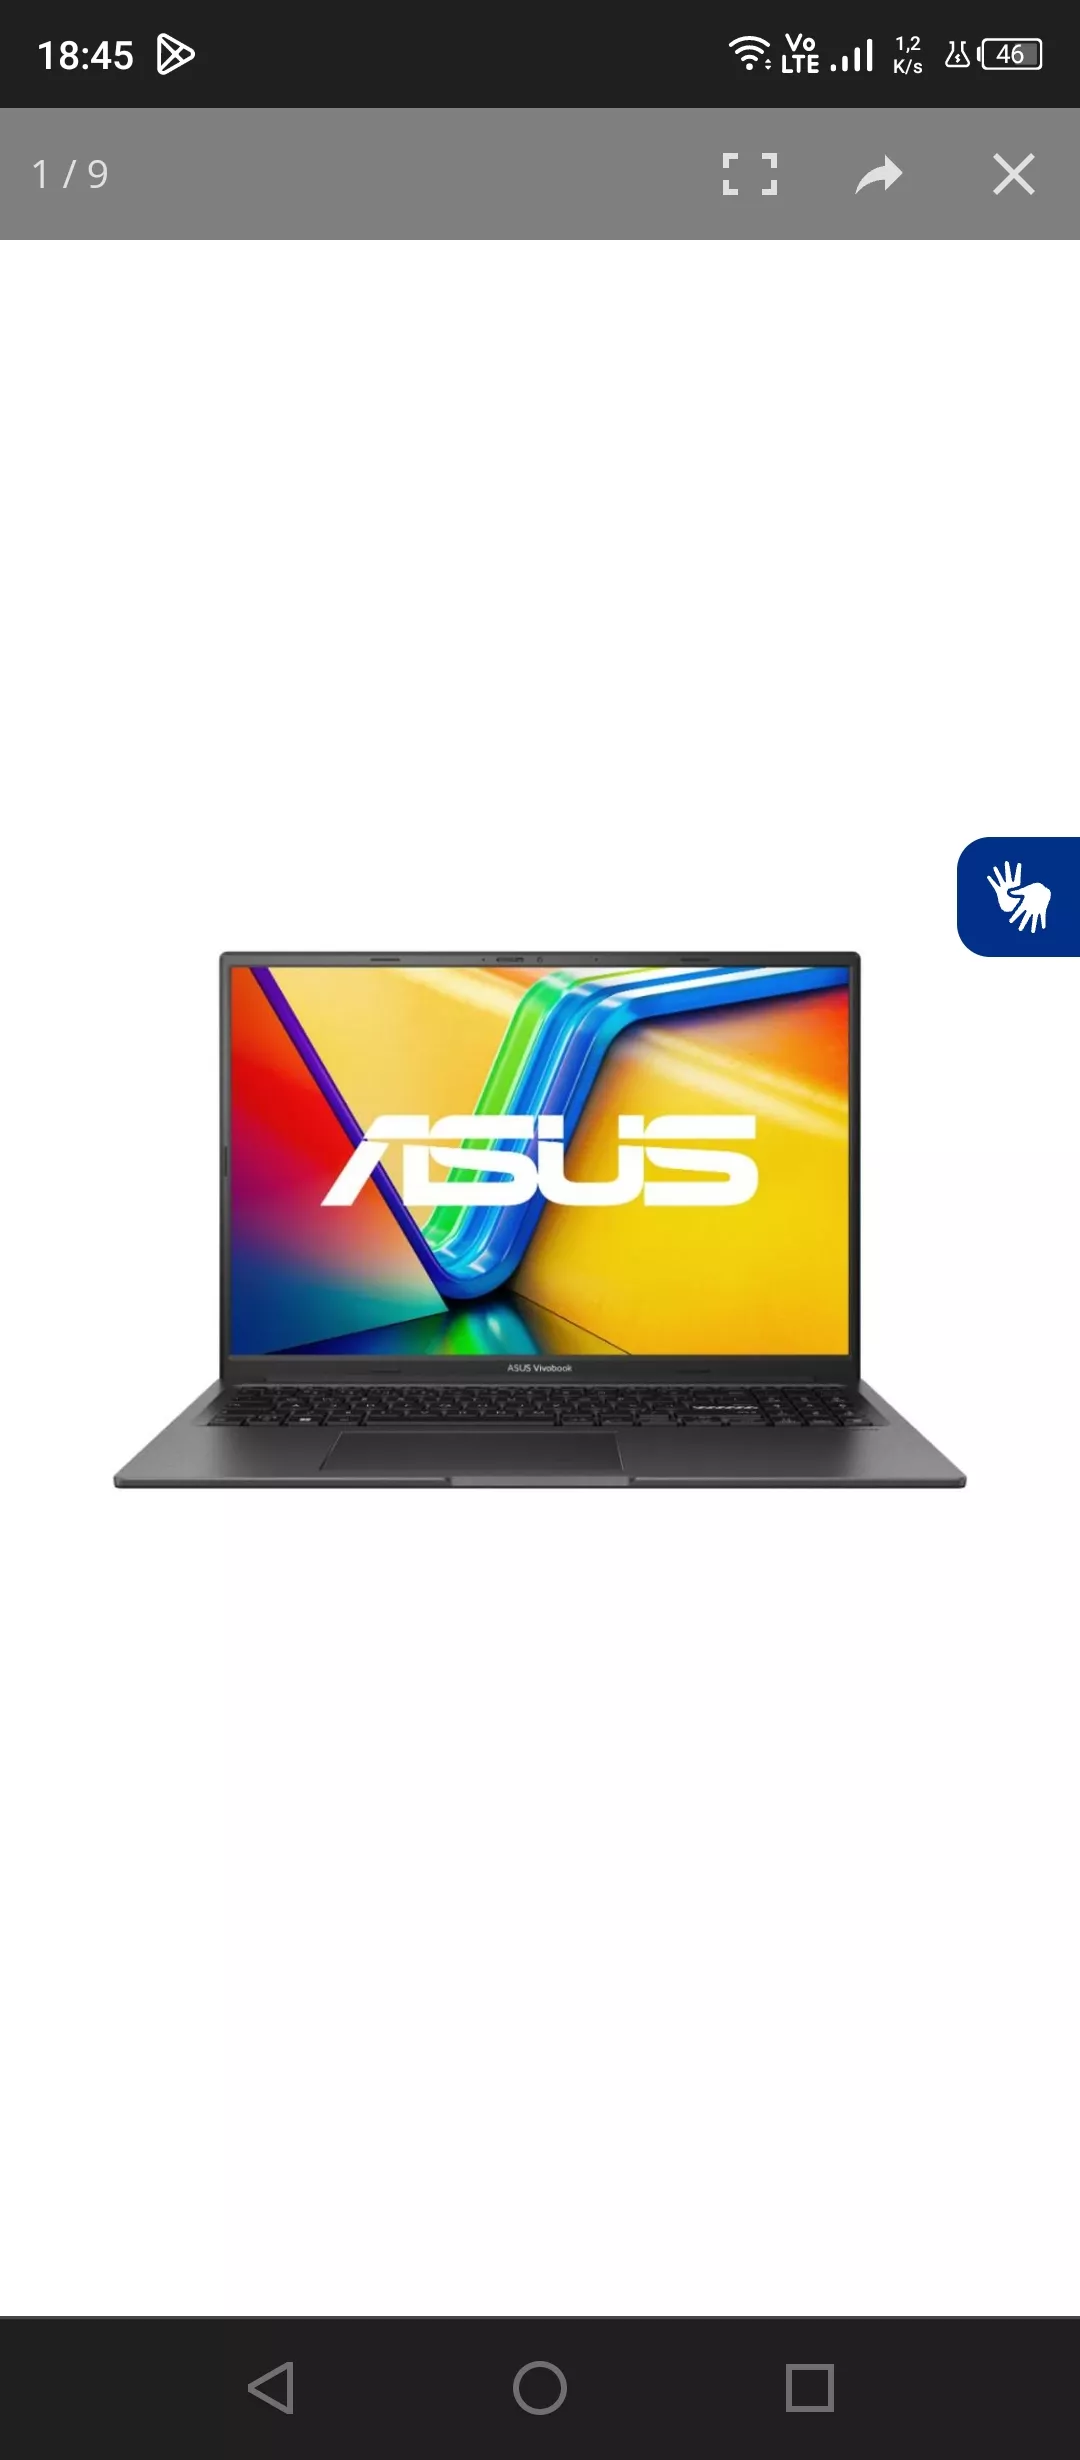 Notebook Asus Vivobook 16x Rtx 2050 I5 12450h 8gb 512gb Linux